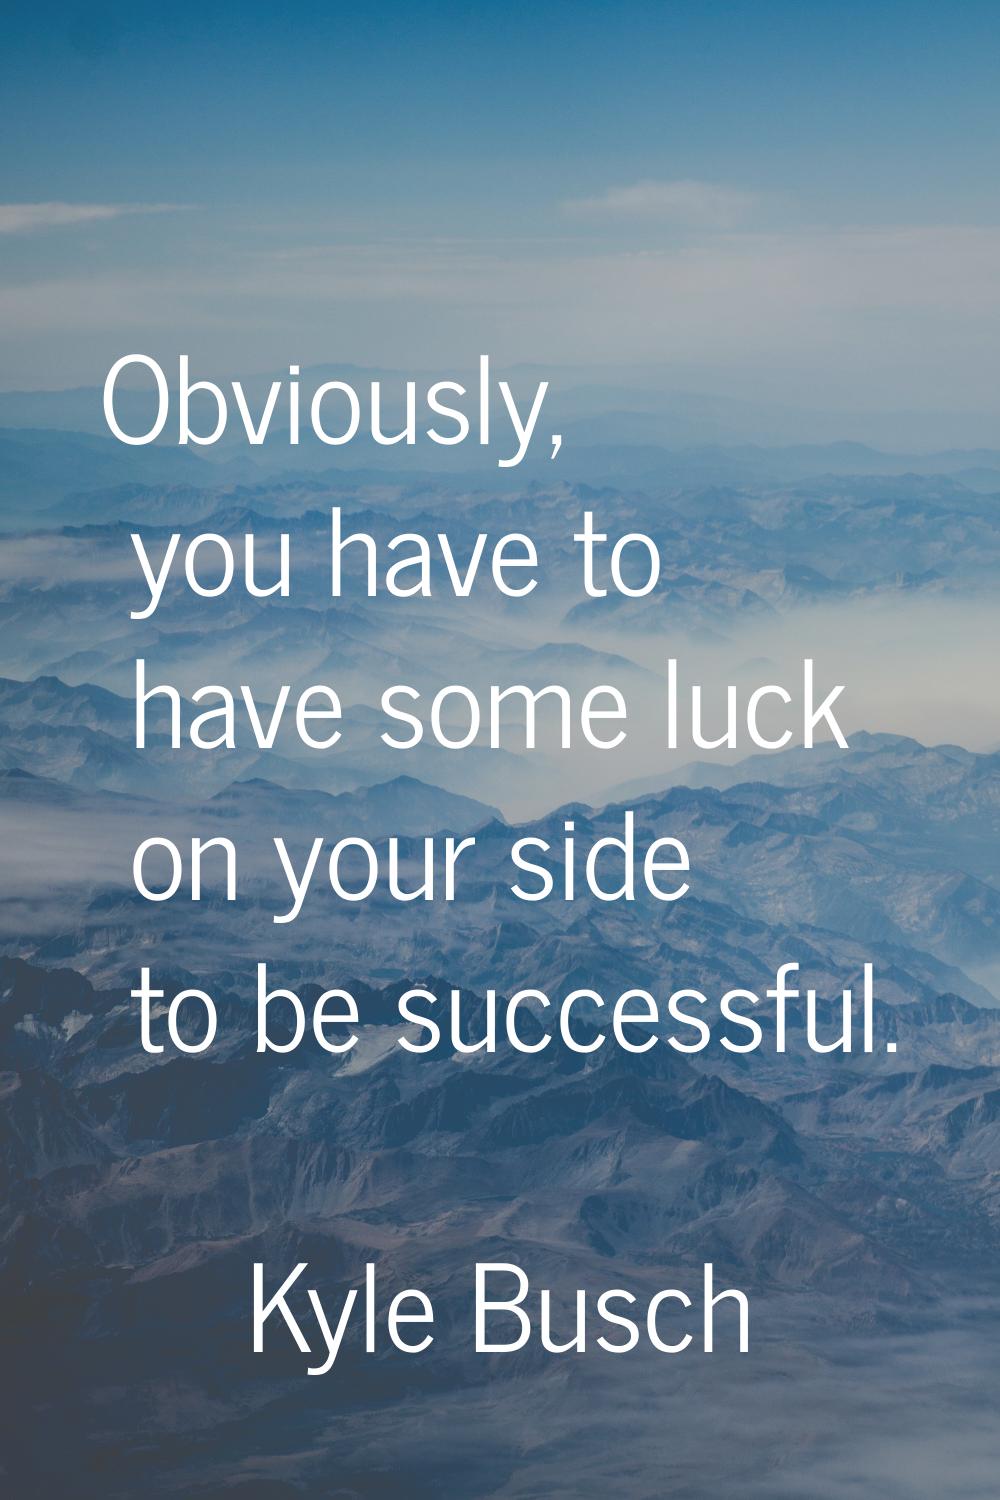 Obviously, you have to have some luck on your side to be successful.